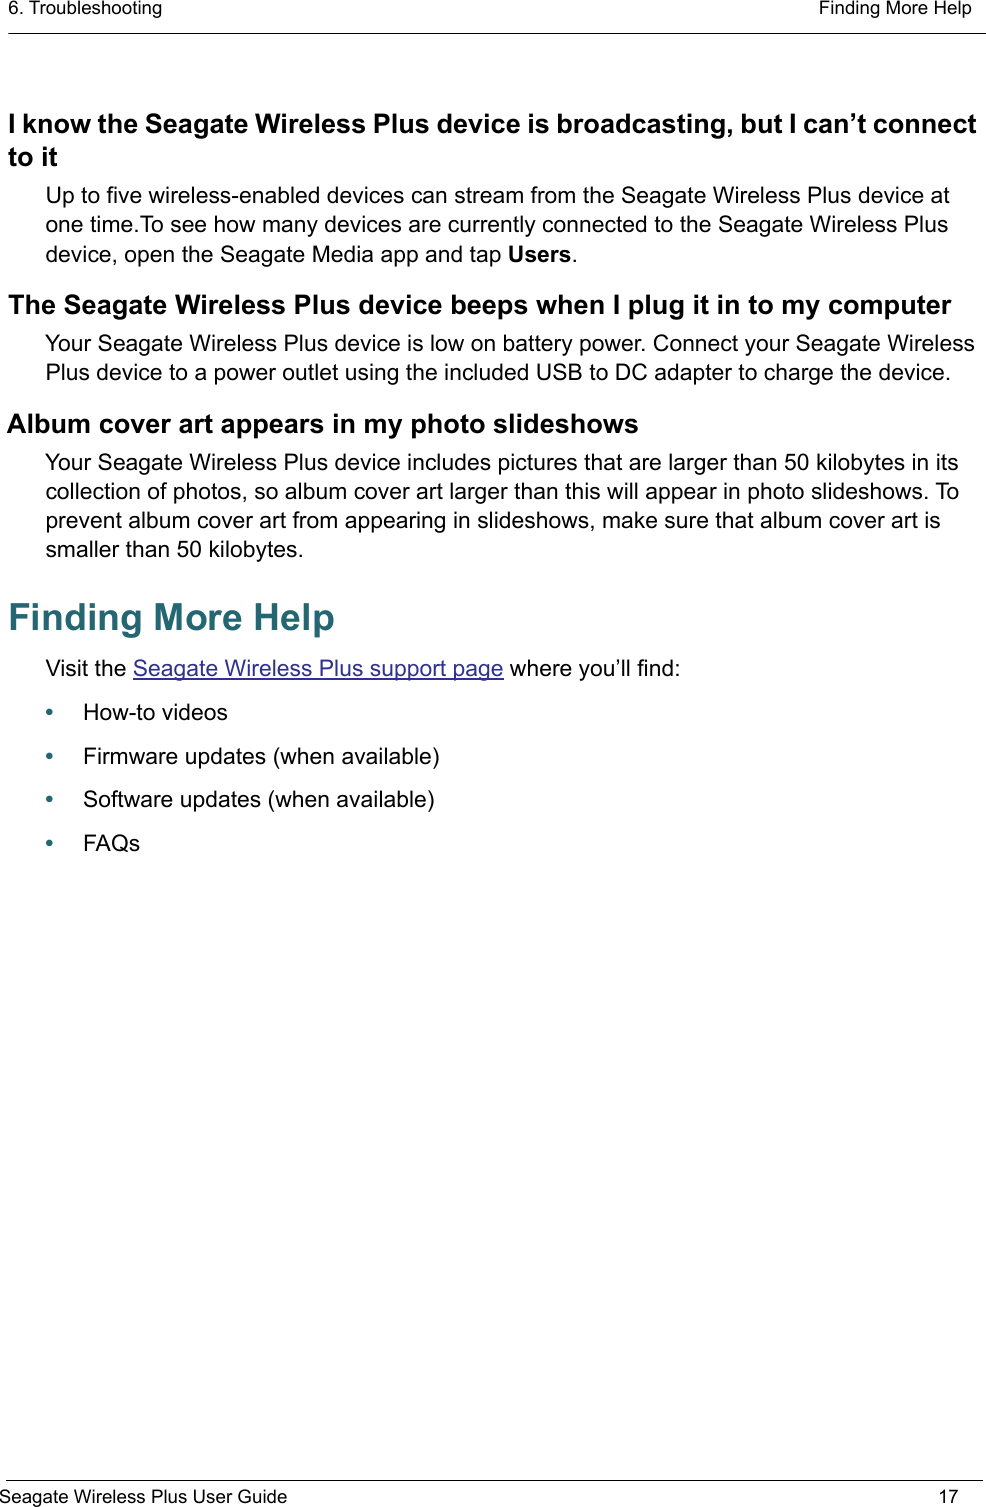 6. Troubleshooting  Finding More HelpSeagate Wireless Plus User Guide 17I know the Seagate Wireless Plus device is broadcasting, but I can’t connect to itUp to five wireless-enabled devices can stream from the Seagate Wireless Plus device at one time.To see how many devices are currently connected to the Seagate Wireless Plus device, open the Seagate Media app and tap Users.The Seagate Wireless Plus device beeps when I plug it in to my computerYour Seagate Wireless Plus device is low on battery power. Connect your Seagate Wireless Plus device to a power outlet using the included USB to DC adapter to charge the device.Album cover art appears in my photo slideshowsYour Seagate Wireless Plus device includes pictures that are larger than 50 kilobytes in its collection of photos, so album cover art larger than this will appear in photo slideshows. To prevent album cover art from appearing in slideshows, make sure that album cover art is smaller than 50 kilobytes.Finding More HelpVisit the Seagate Wireless Plus support page where you’ll find:•How-to videos•Firmware updates (when available)•Software updates (when available)•FAQs